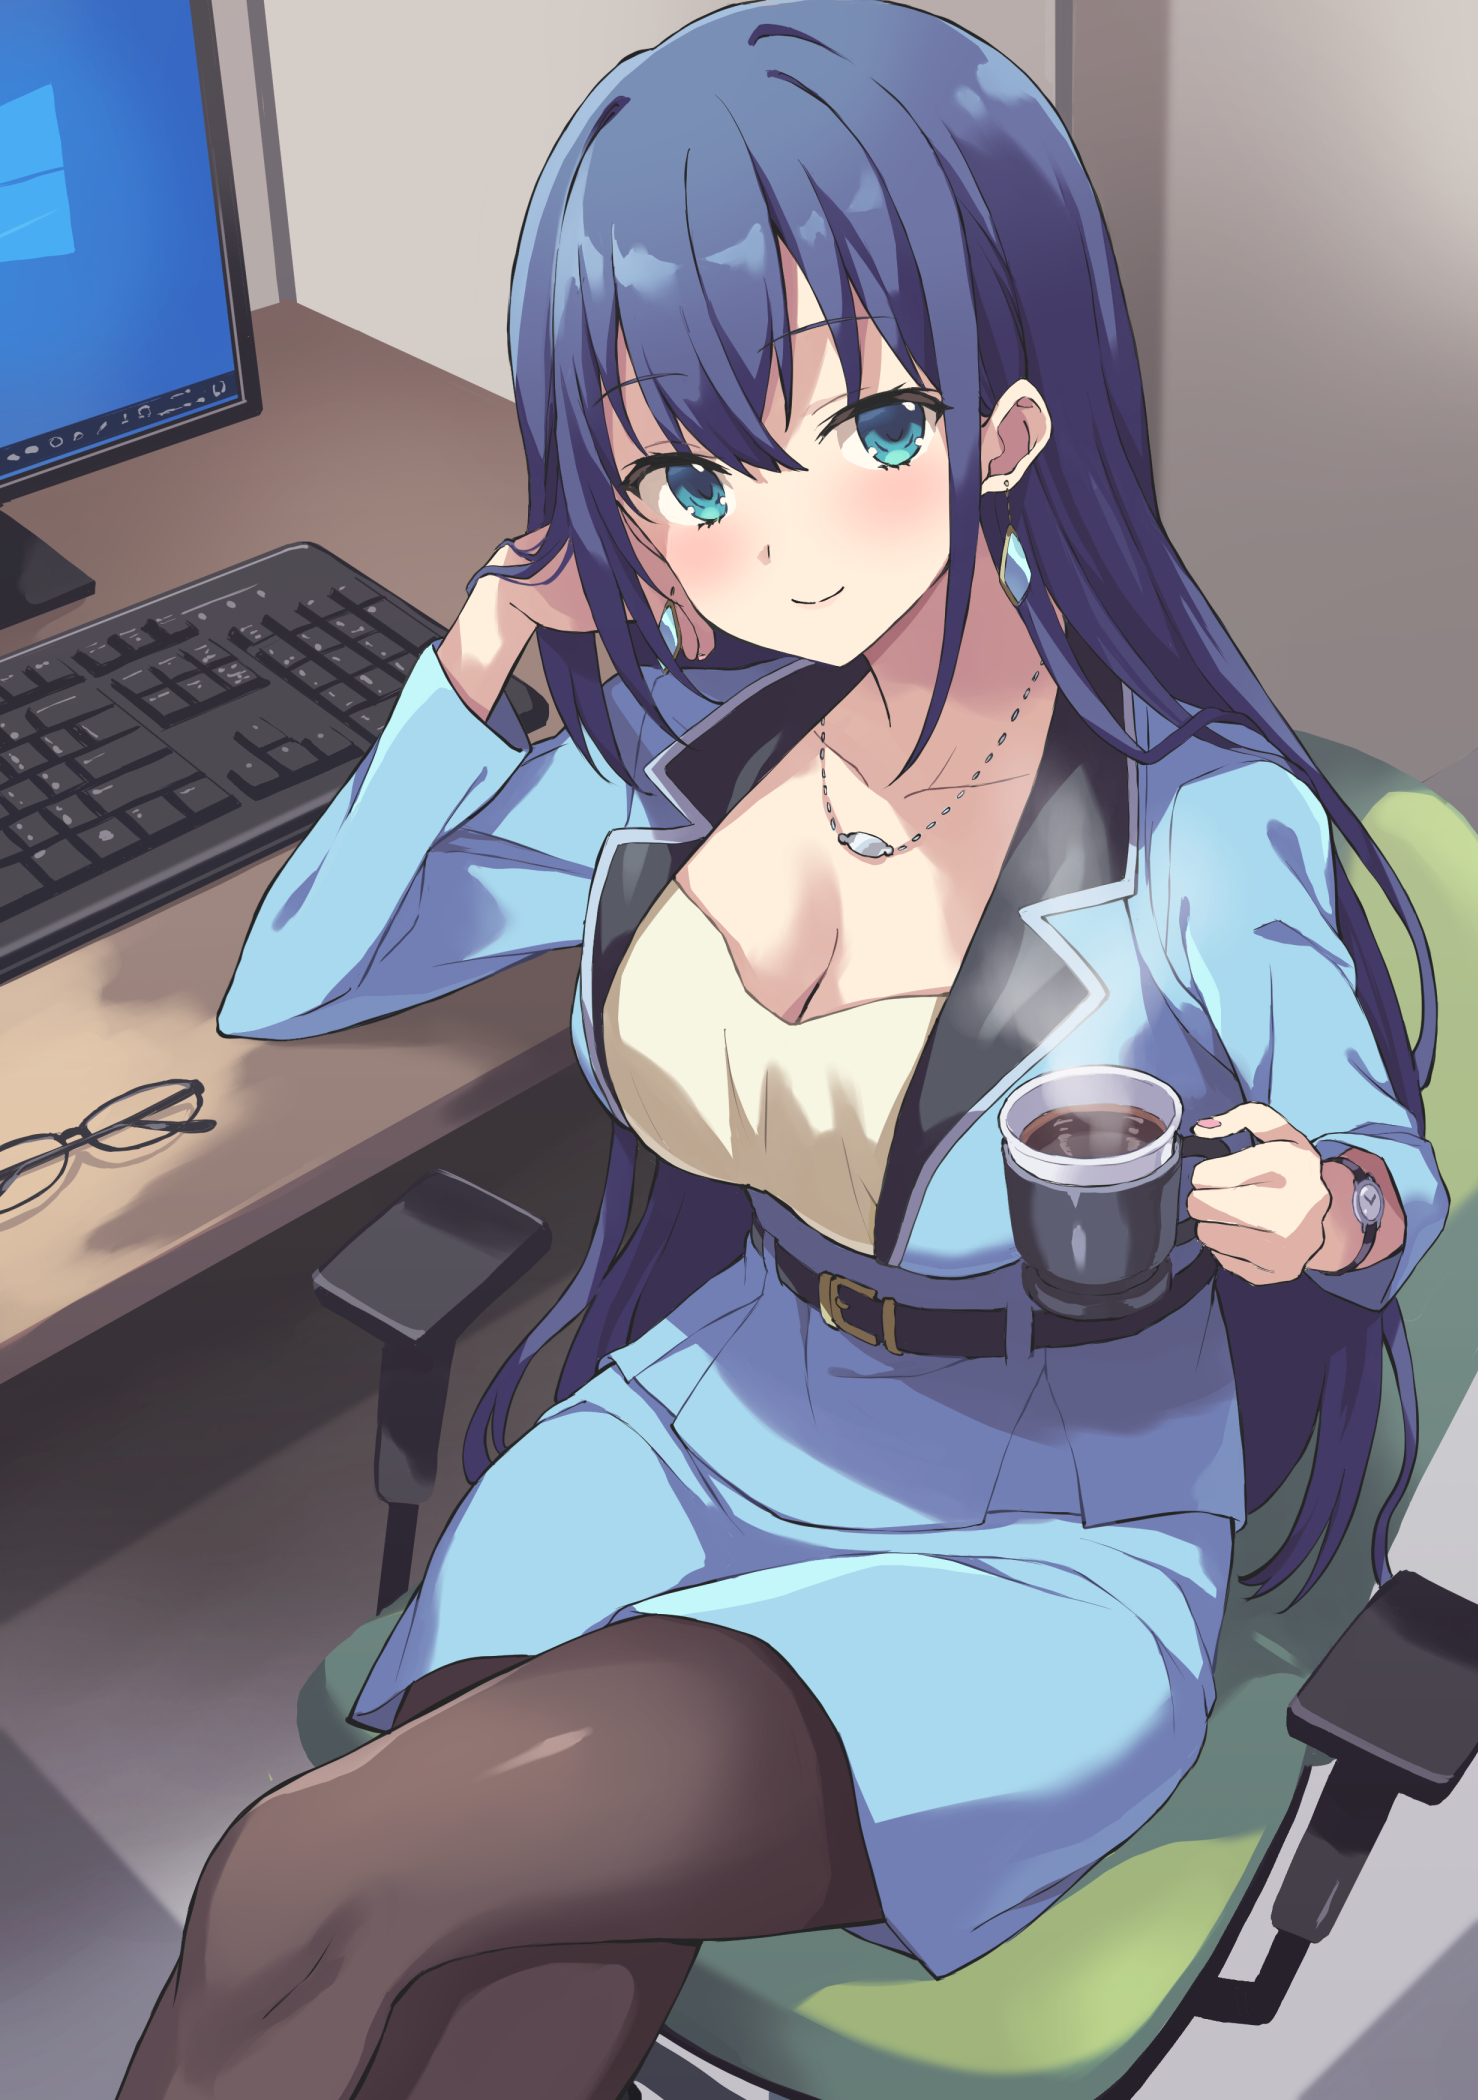 Anime Girls Vertical Legs Crossed Chair Drink Necklace Computer Smiling Looking At Viewer Glasses Lo 1478x2100